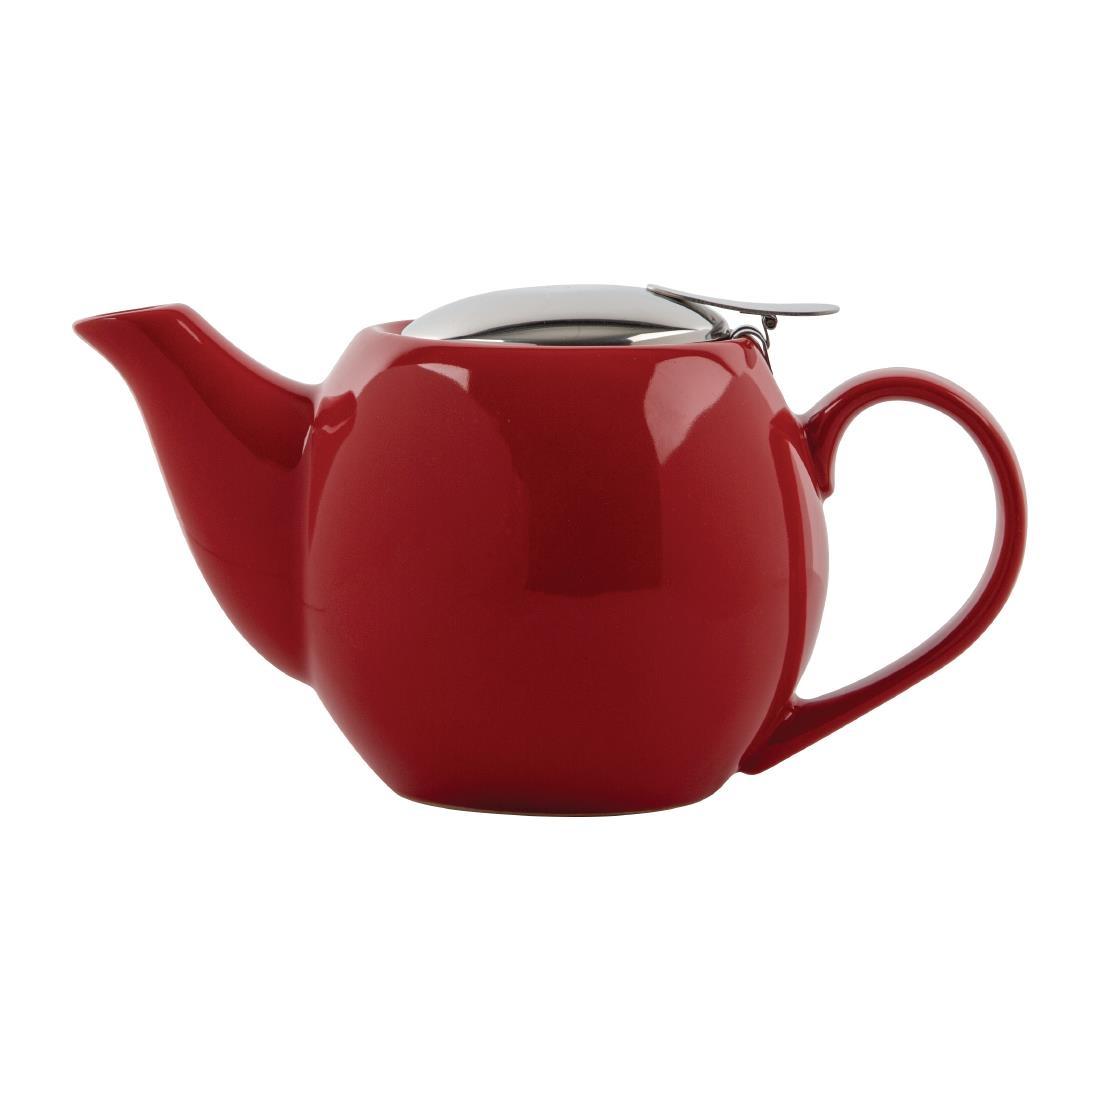 Olympia Cafe Teapot 510ml Red - GM594  - 3